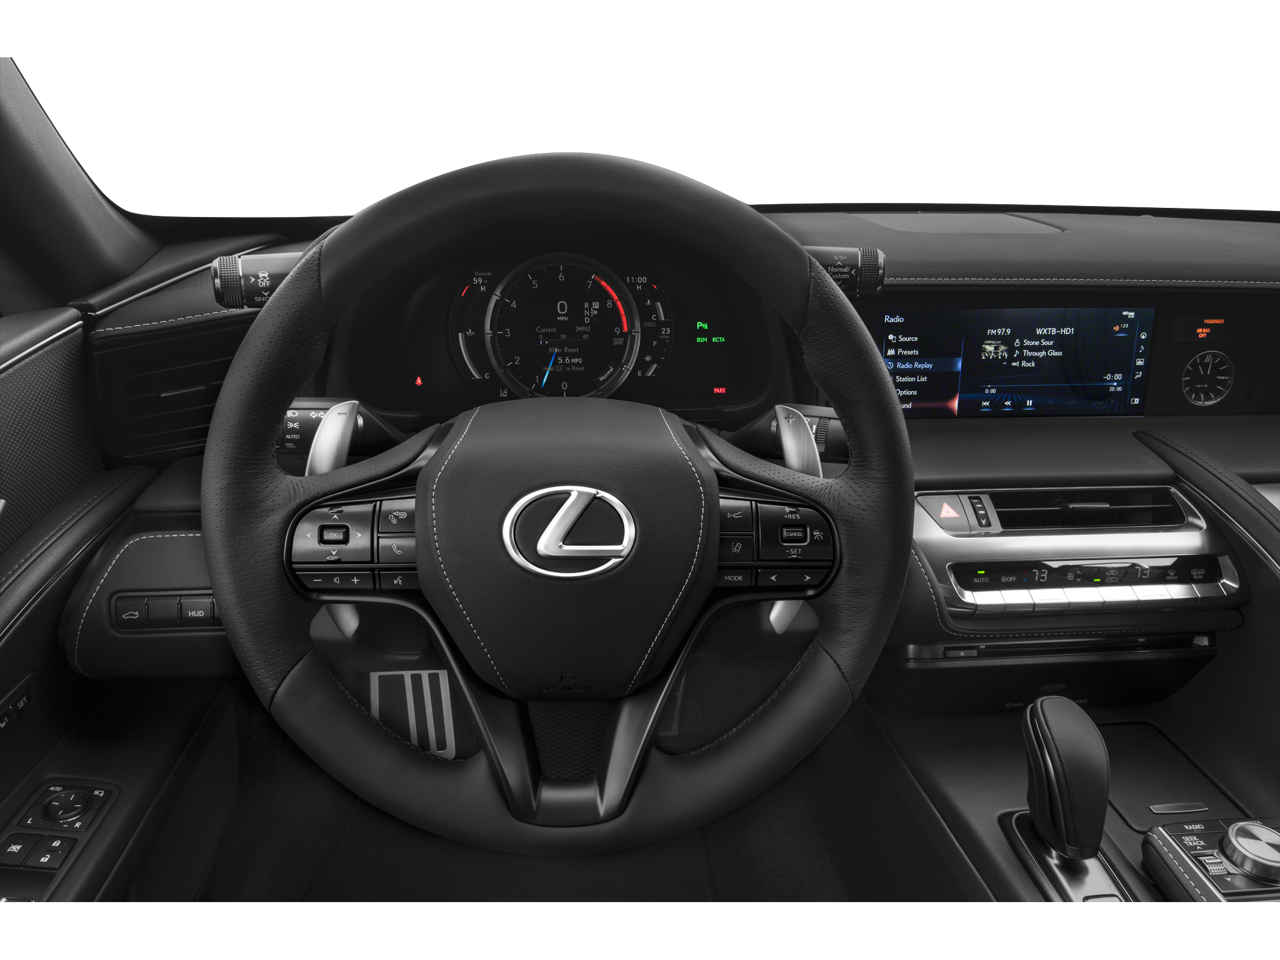 2022 Lexus LC 500 TOURING/MARK LEV/HEAD-UP/UNLIMITED MILE WARRANTY